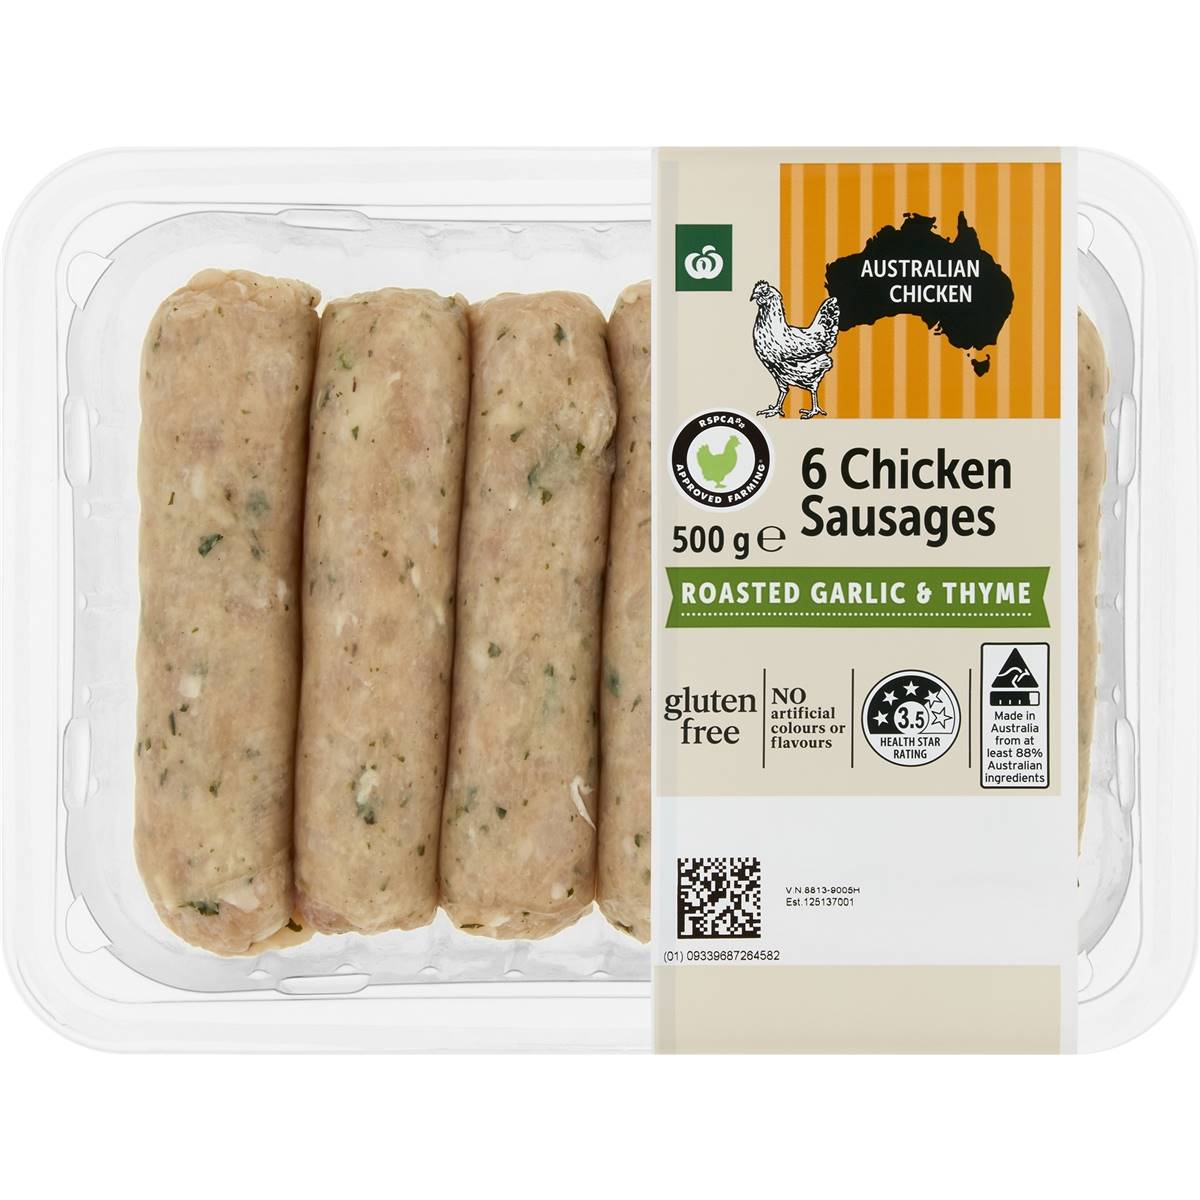 Calories in Woolworths 6 Chicken Sausages Garlic & Thyme